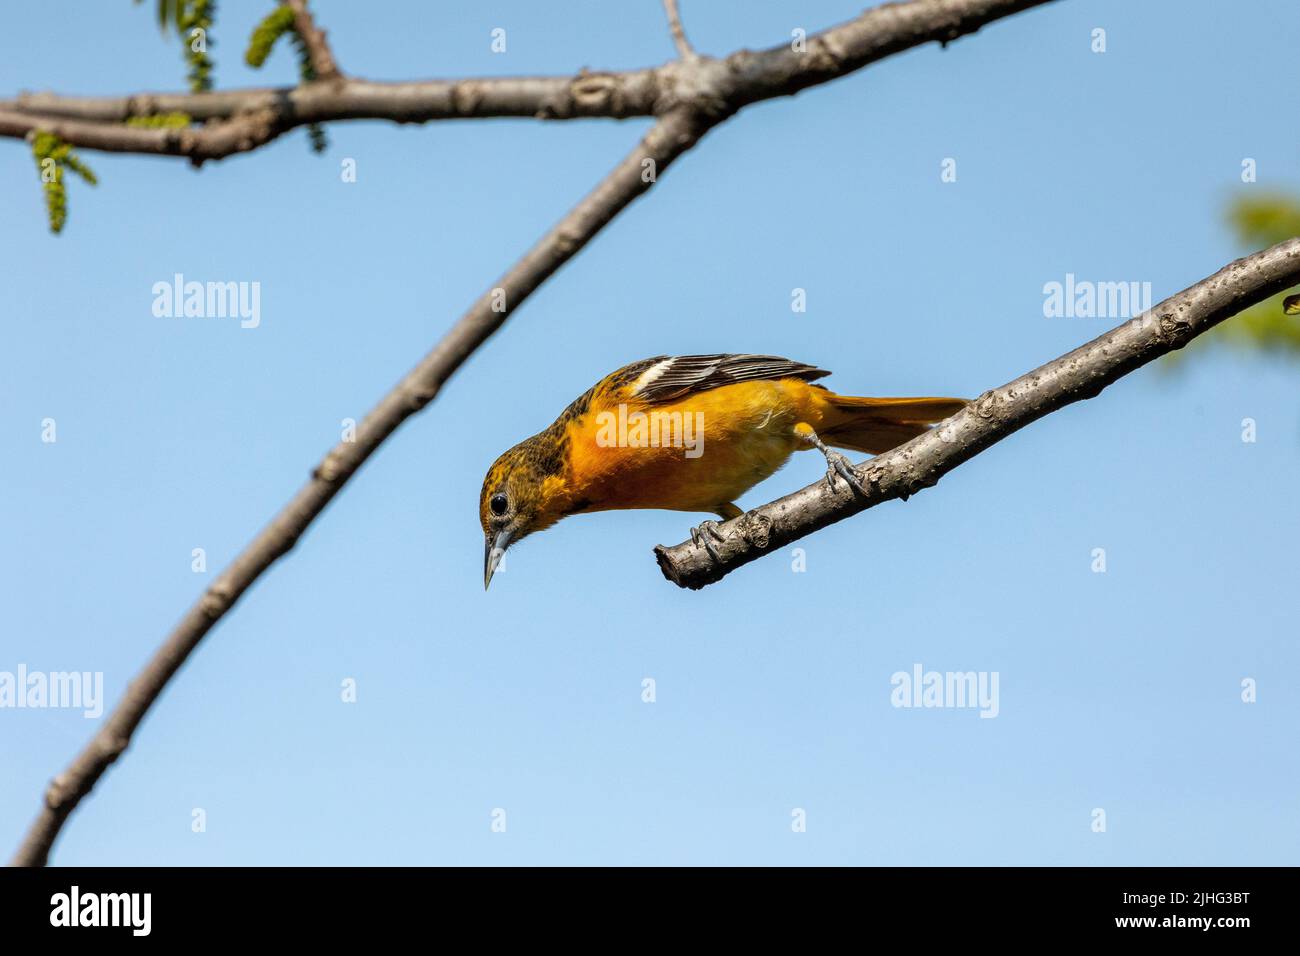 Baltimore oriole perched on branch Stock Photo